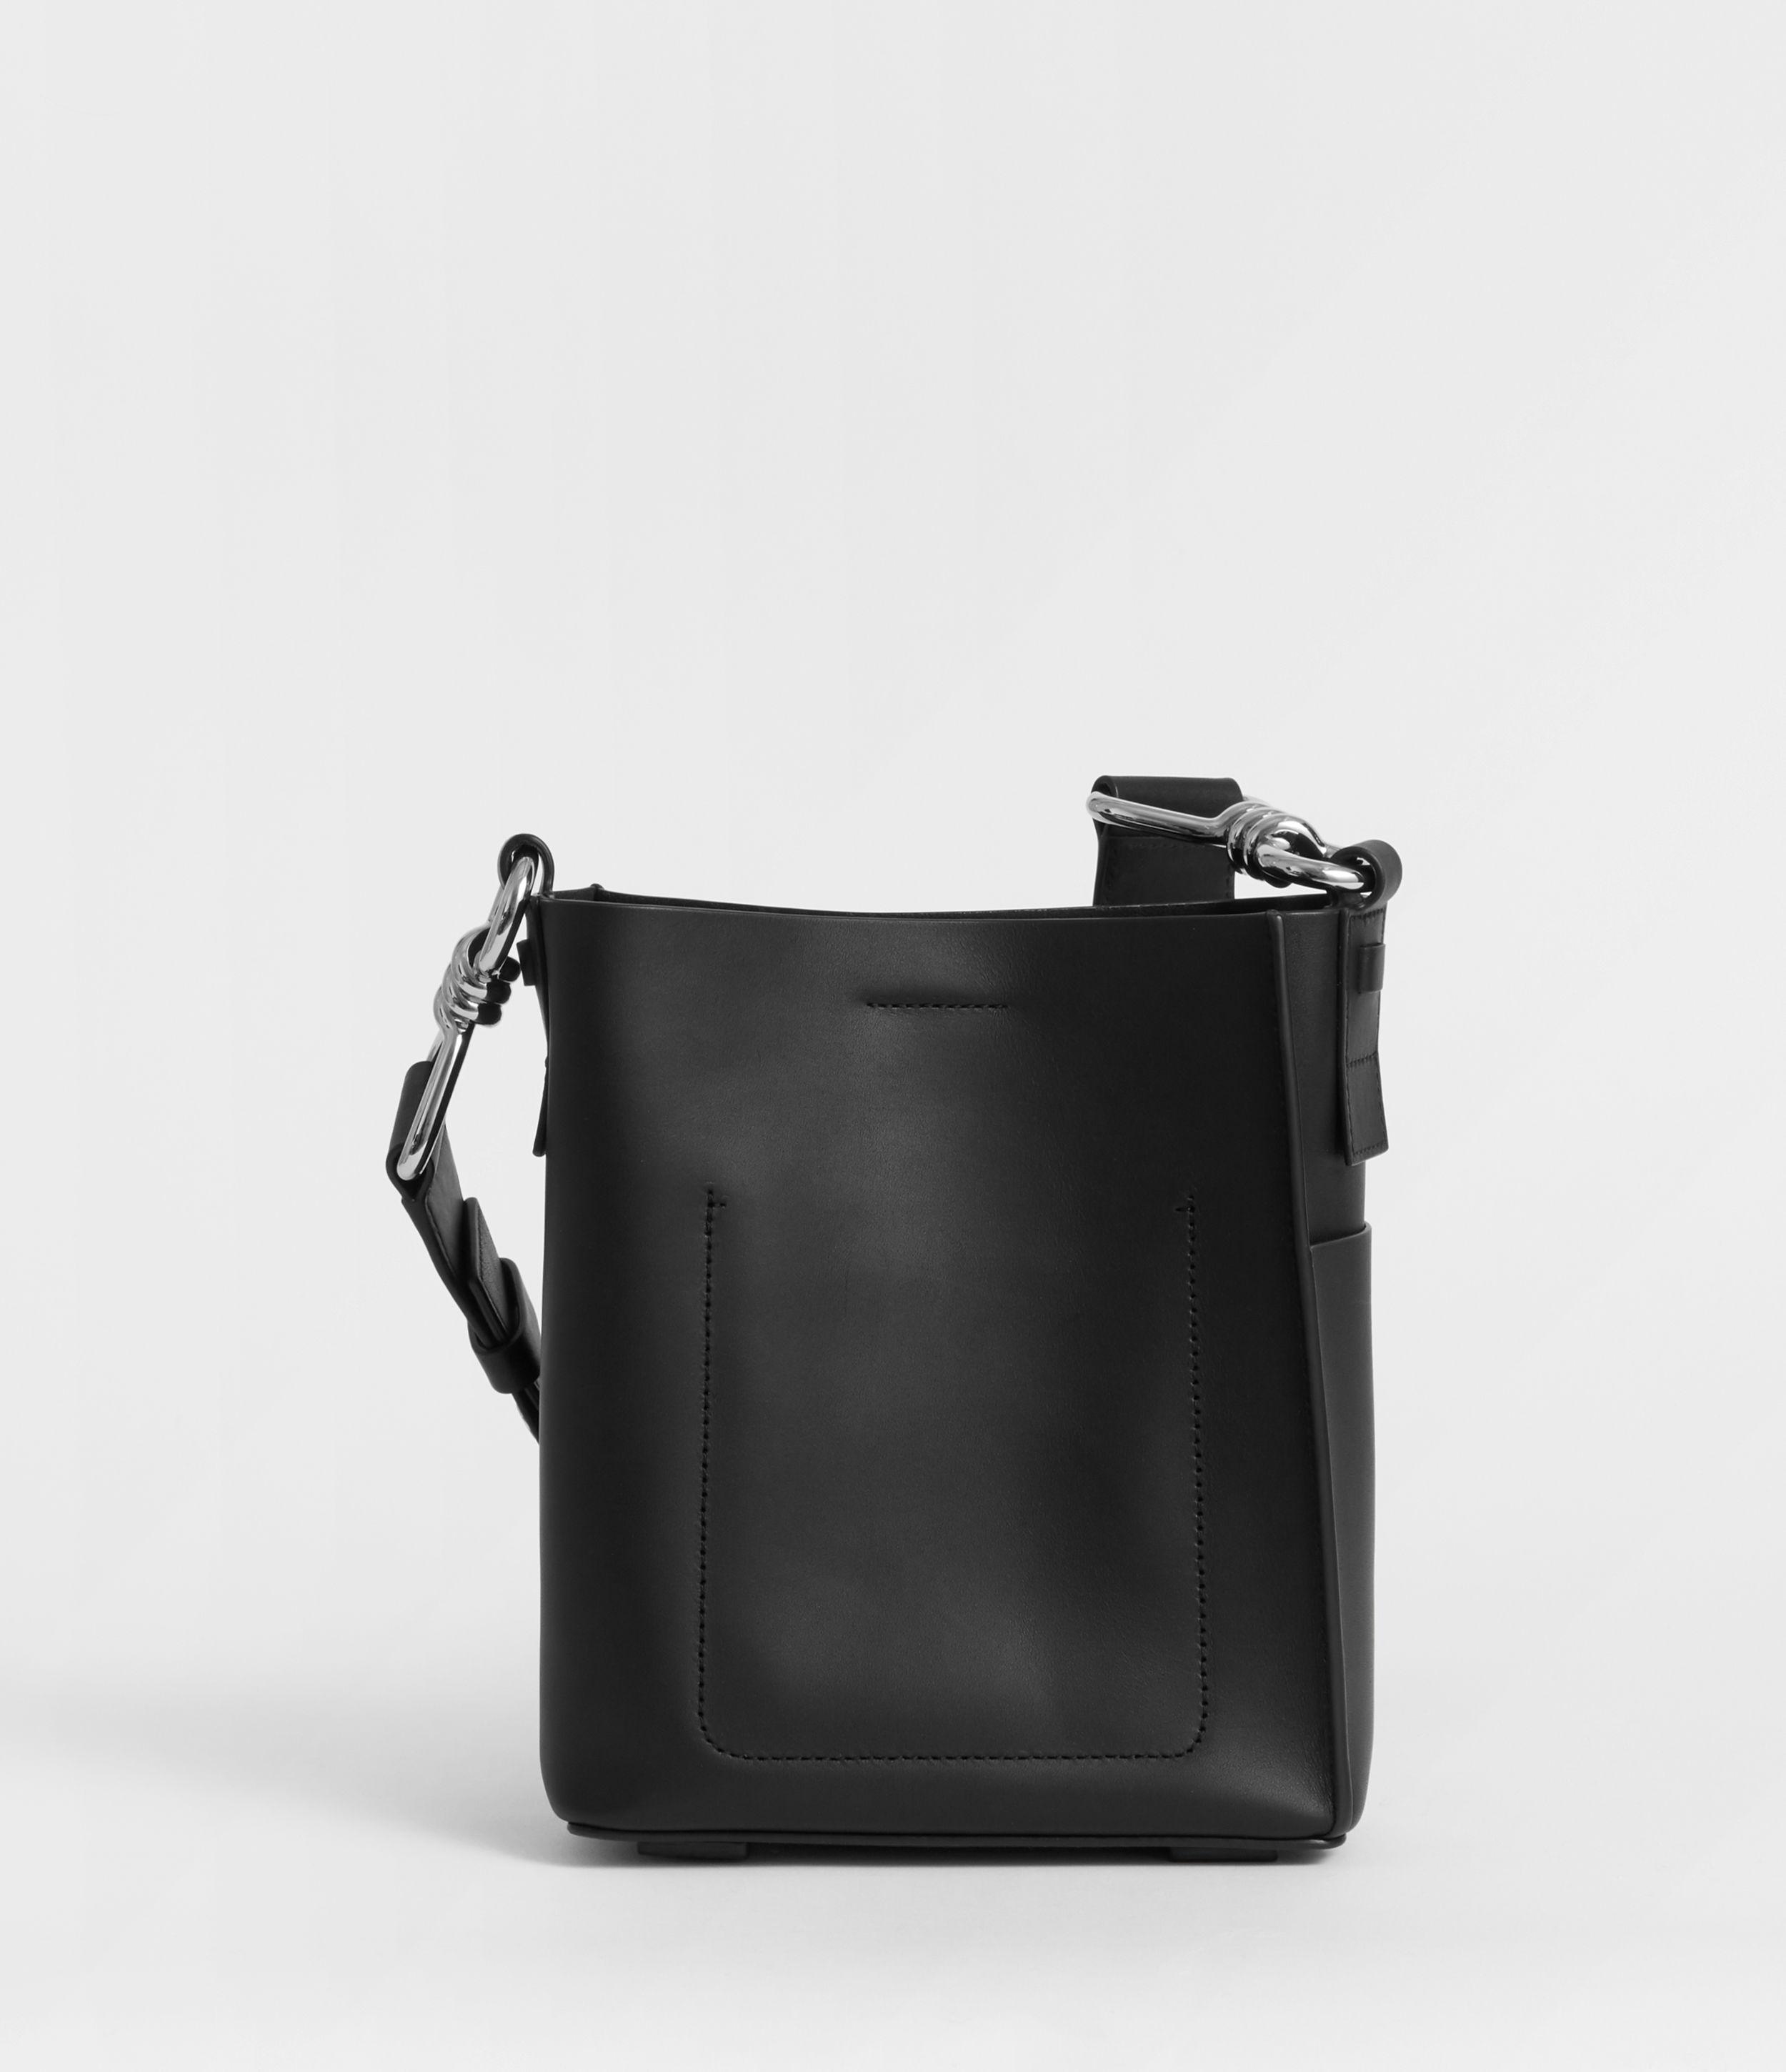 AllSaints Captain Leather North South Crossbody Bag in Black - Lyst